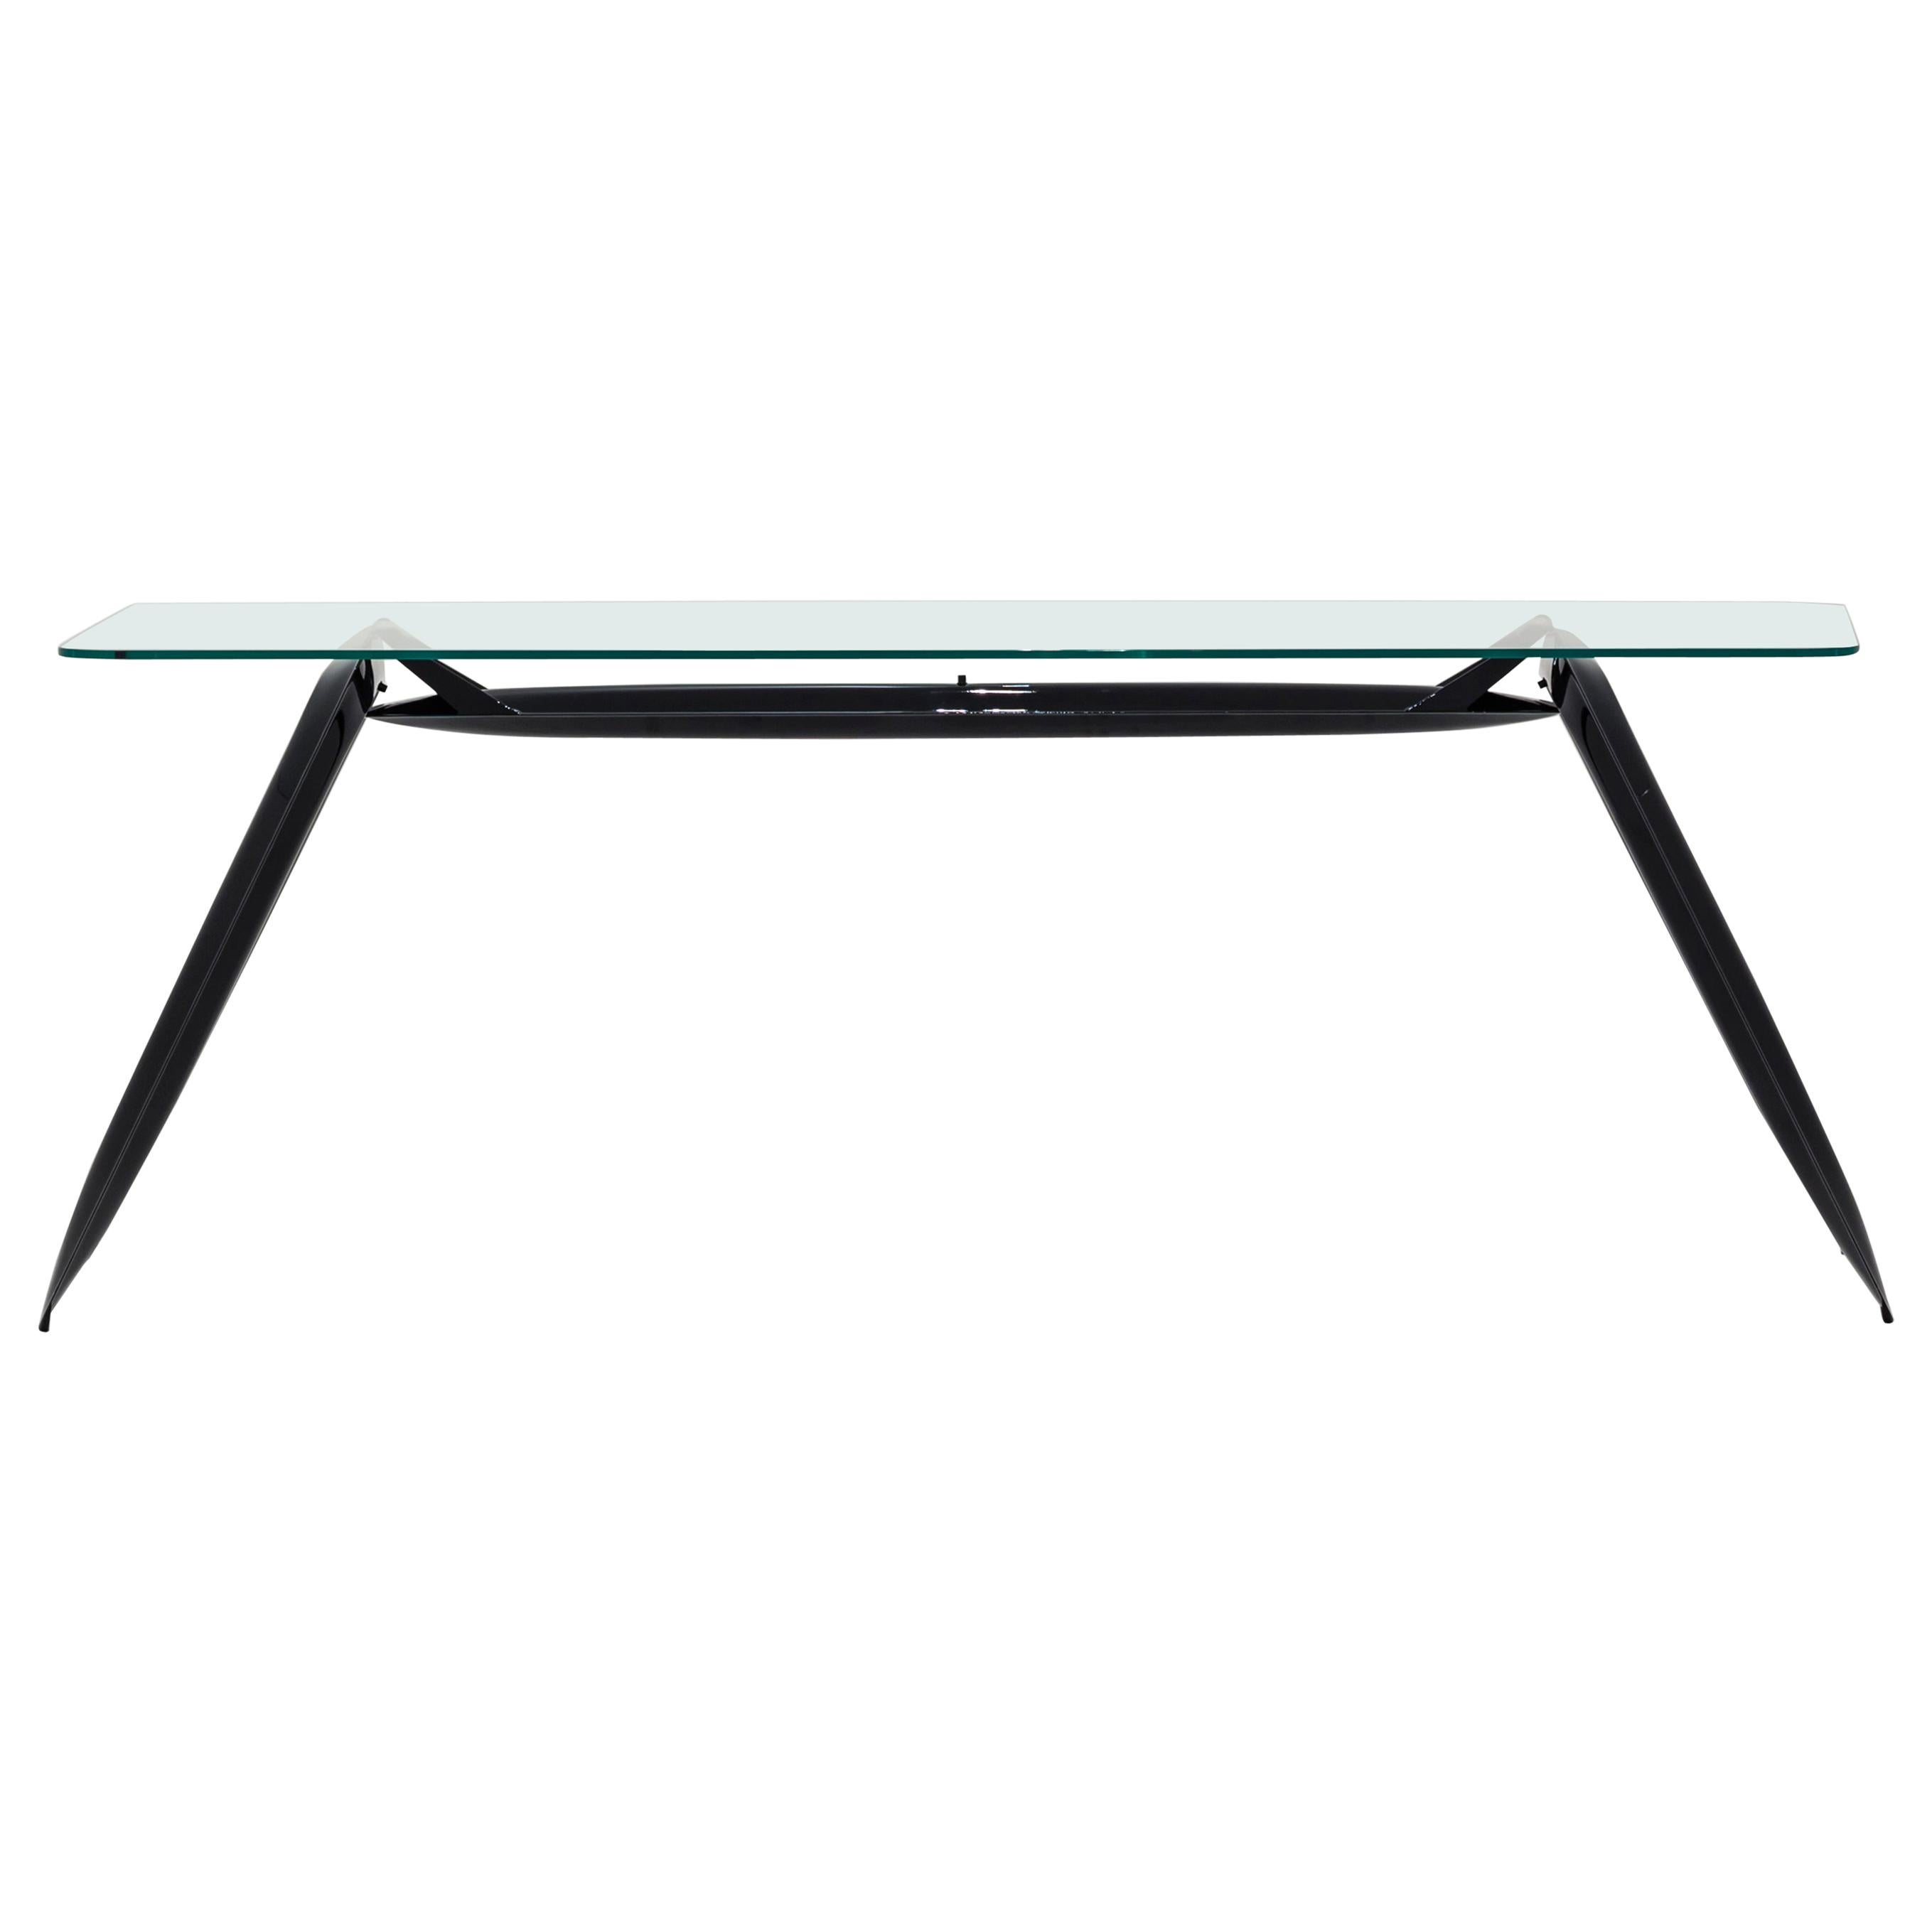 Nogi Table Polished Black Glossy Color Carbon Steel Writing Table by Zieta